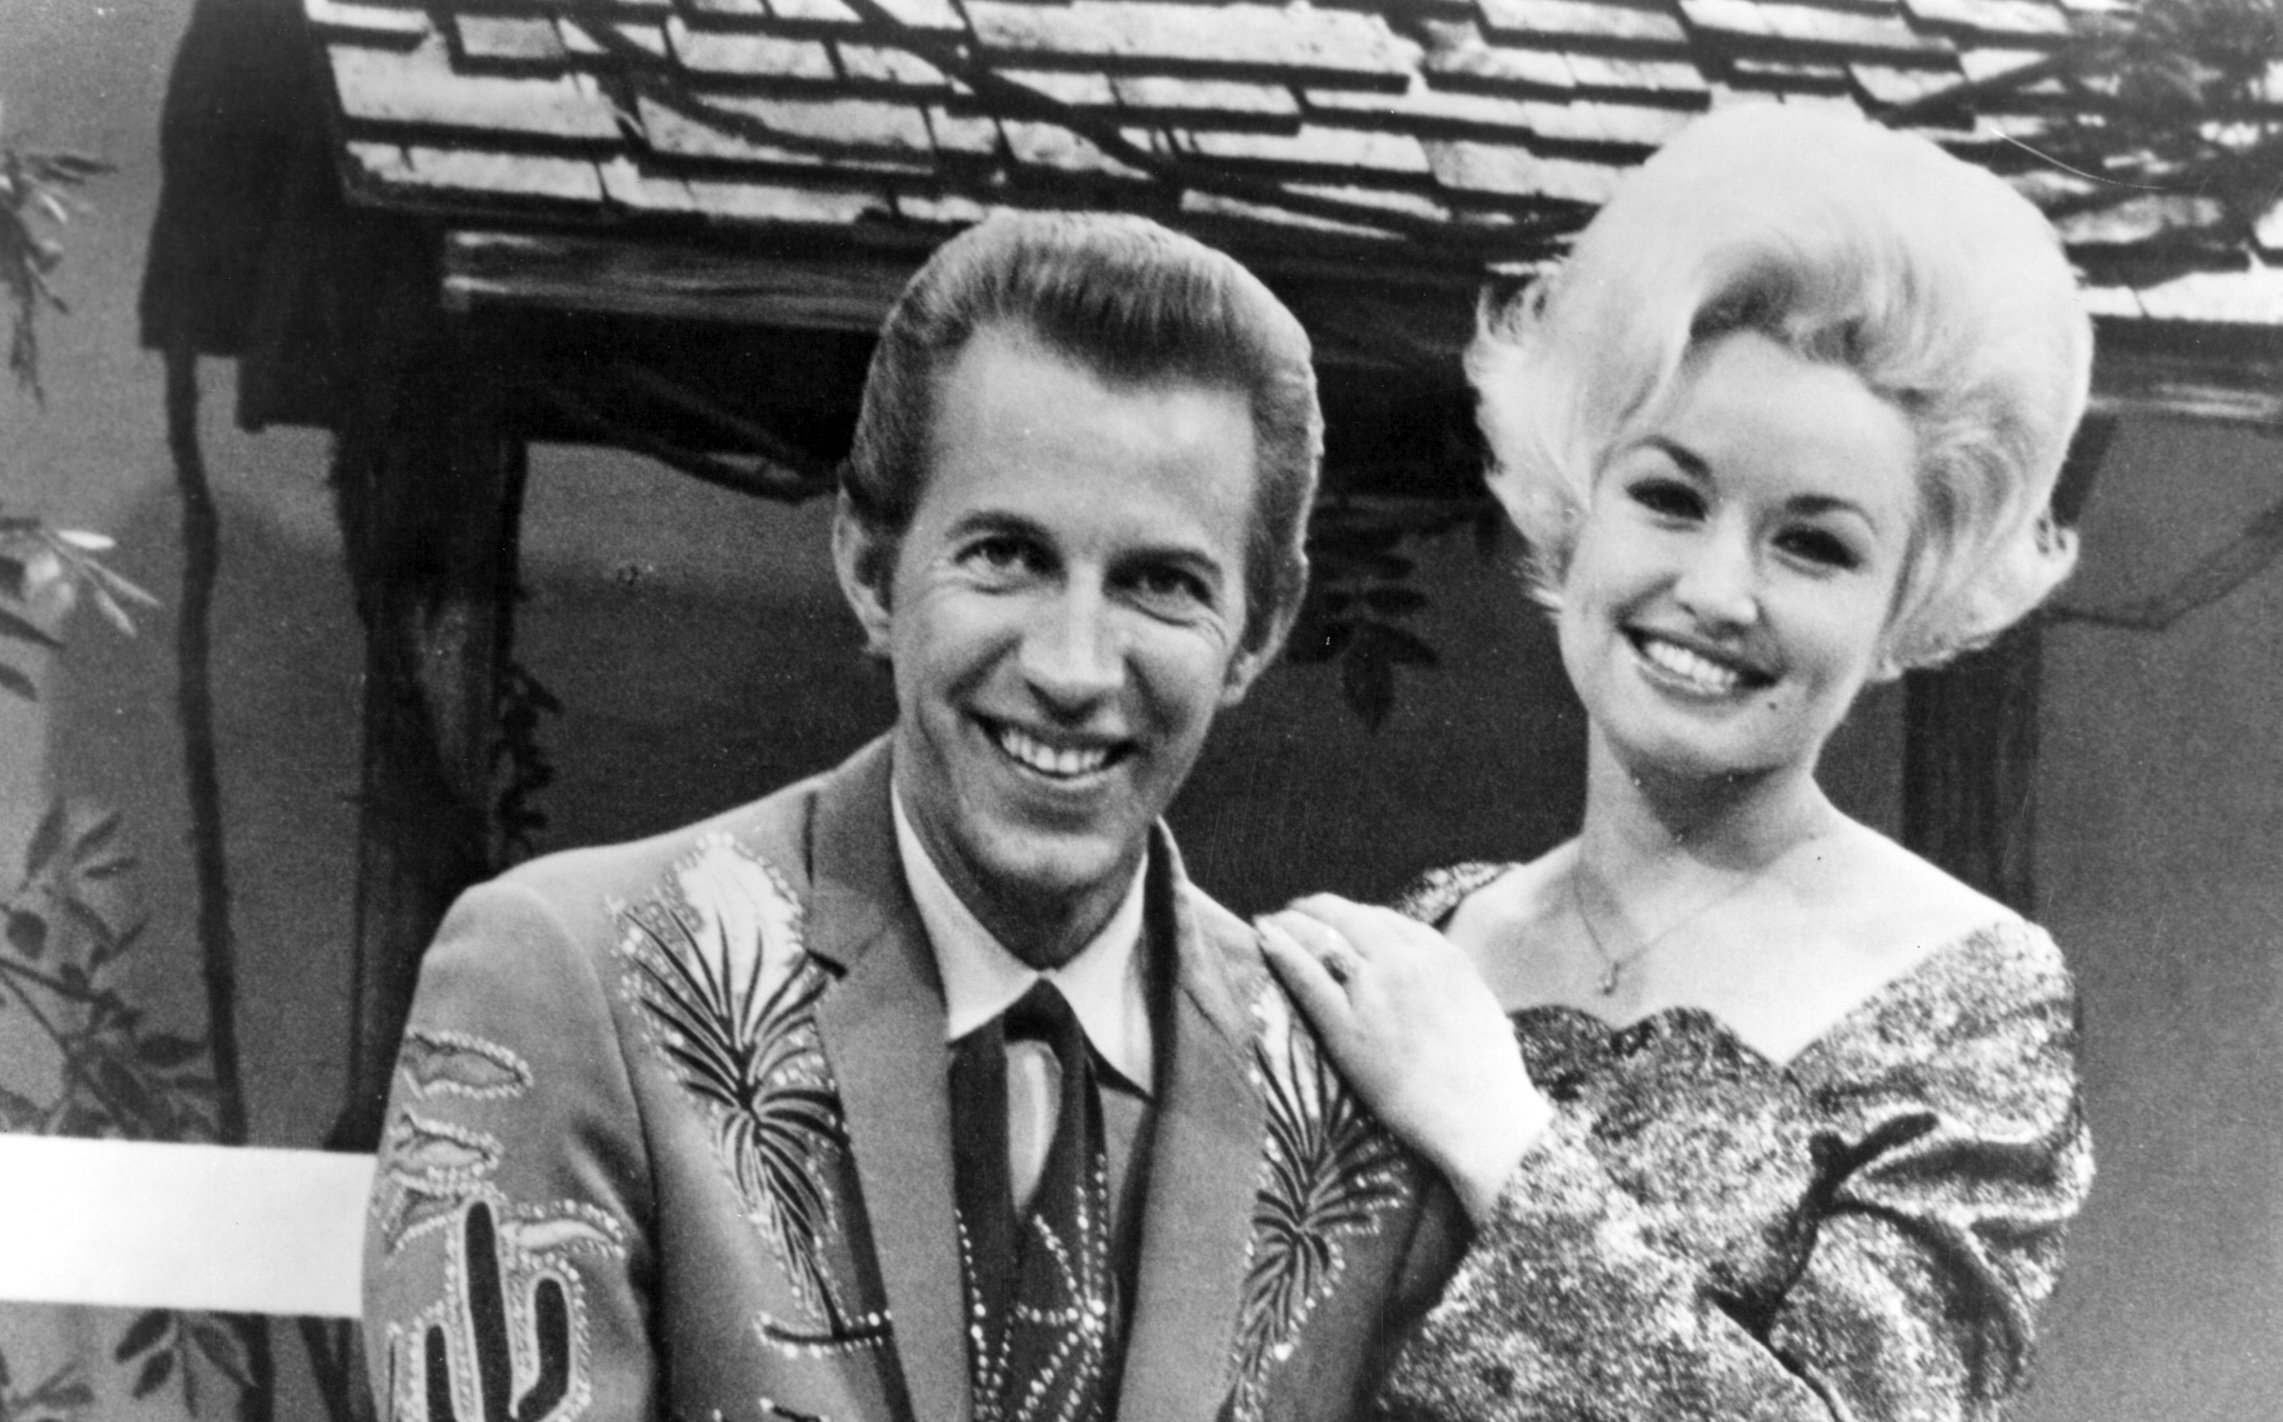 Country singer Dolly Parton with her collaborator Porter Wagoner on the set of his TV show in 1967. Mr. Wagoner is wearing a Nudie Suit designed by Nudie Cohn of Nudie's Rodeo Tailors.